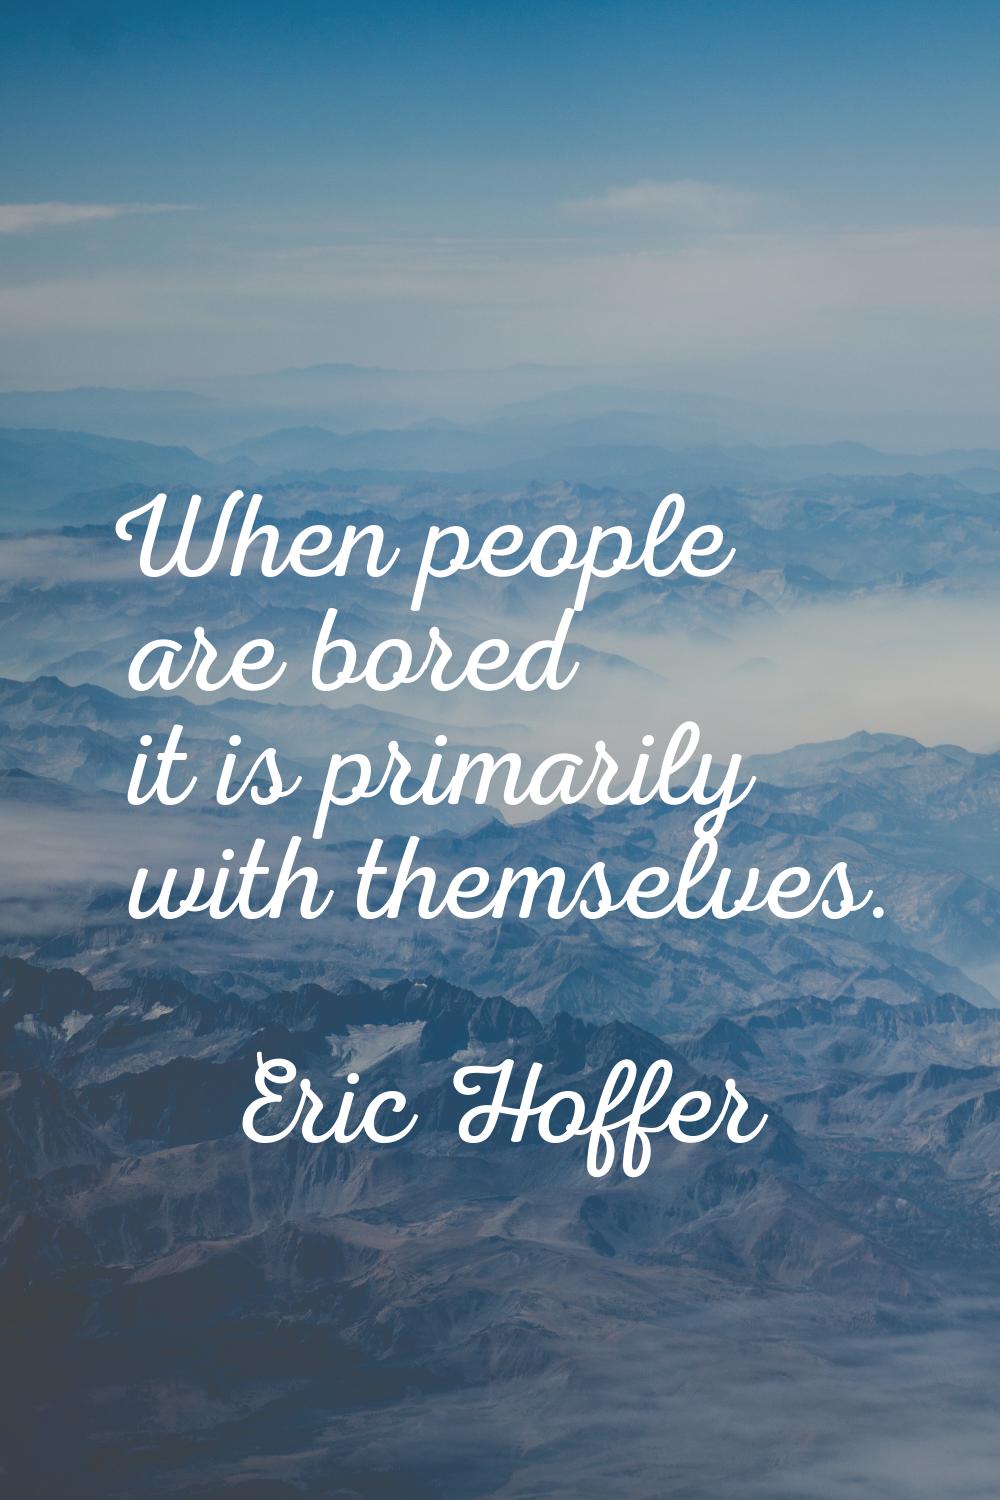 When people are bored it is primarily with themselves.